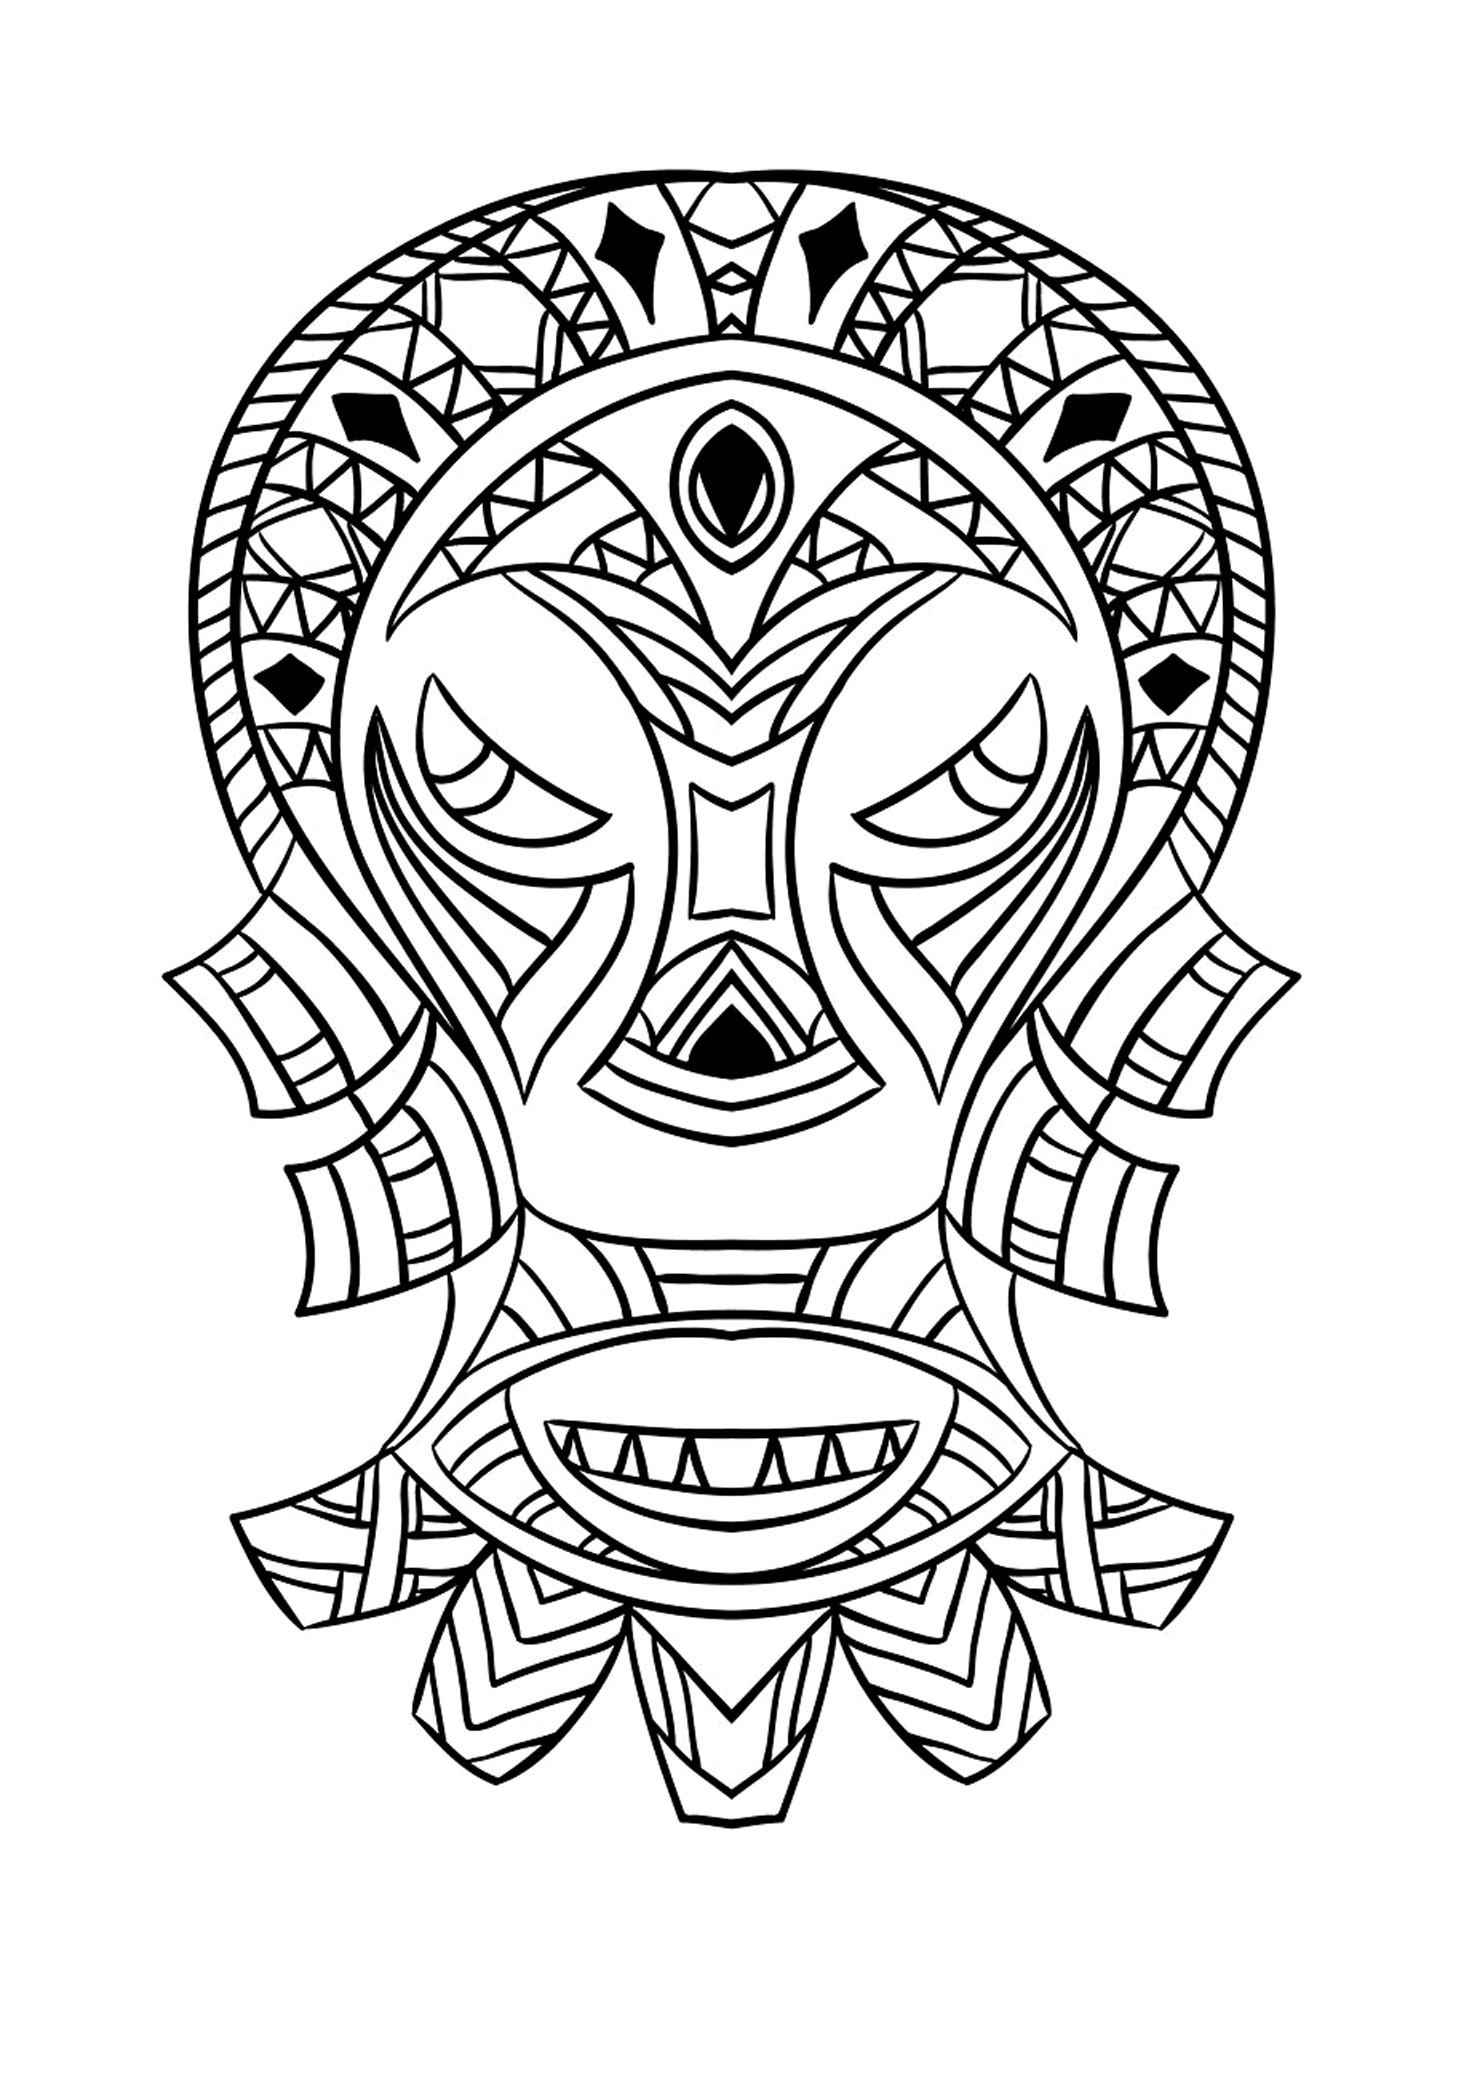 Image of Masks to color, easy for children